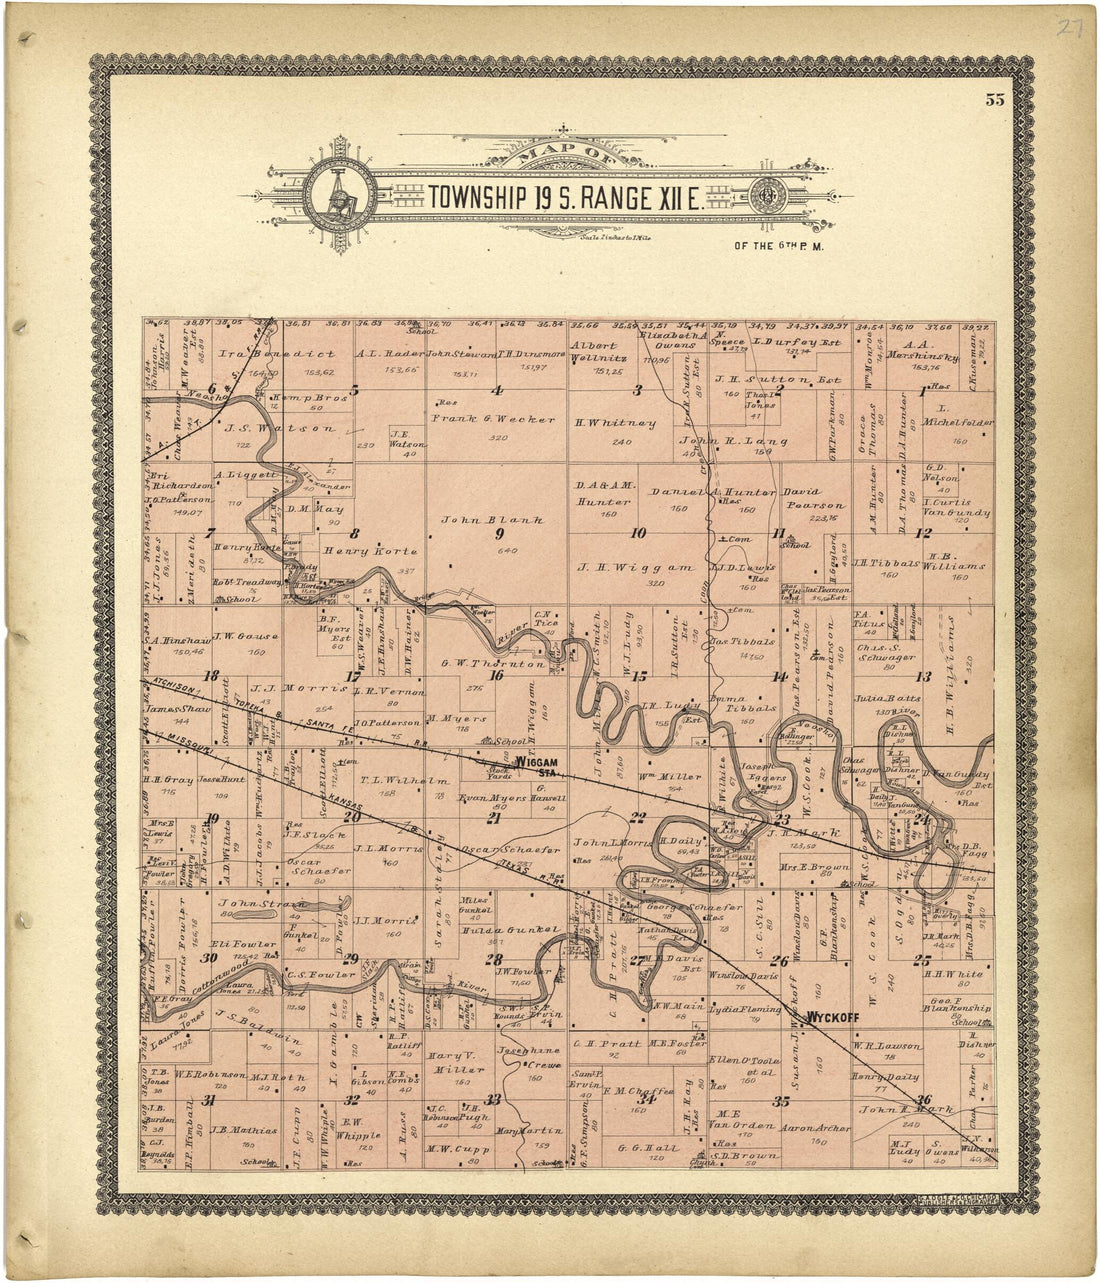 This old map of Map of Township 19 S. Range XII E. from Standard Atlas of Lyon County, Kansas from 1901 was created by  Geo. A. Ogle &amp; Co in 1901